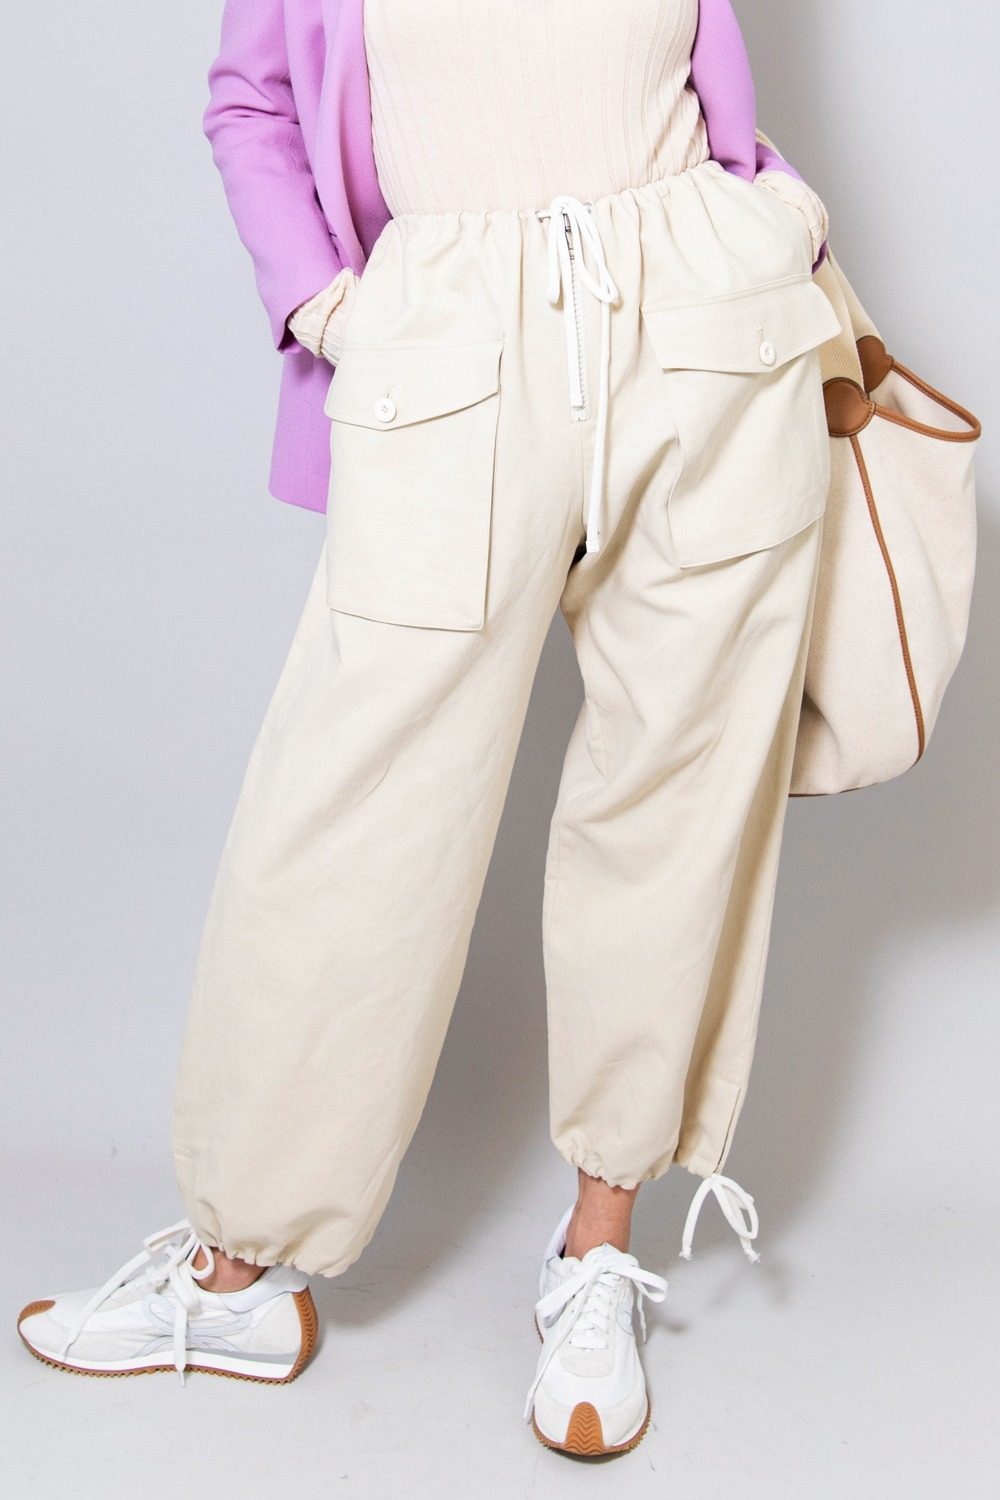 Thumbnail of http://Gucci%20Oversized%20Hose%20in%20Beige